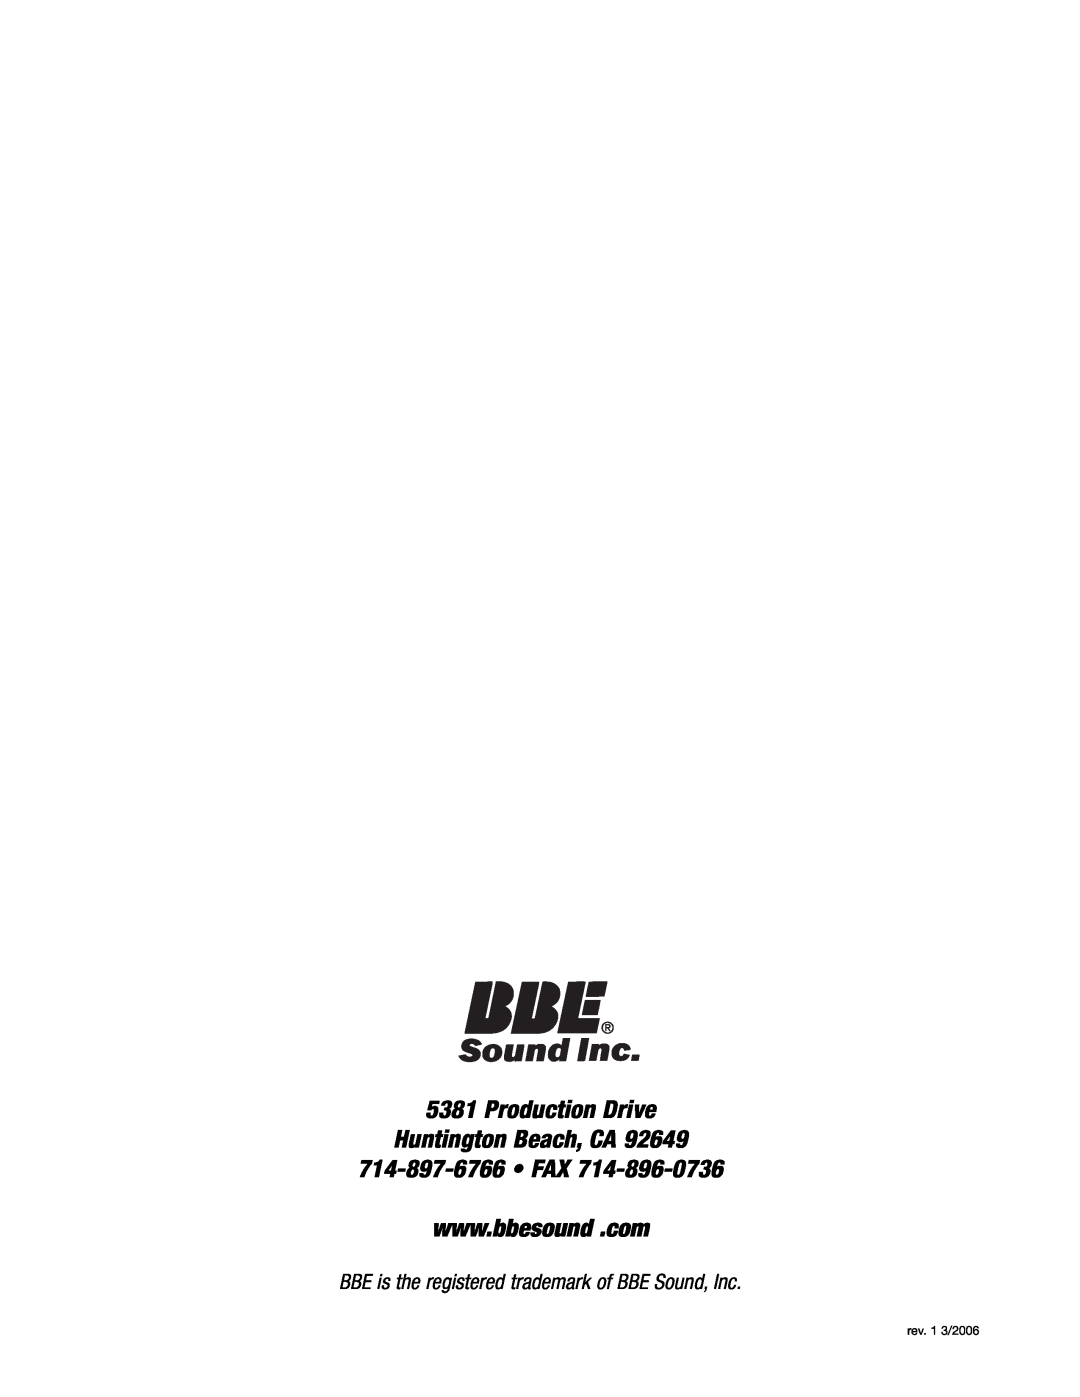 BBE DS48 manual Production Drive Huntington Beach, CA, BBE is the registered trademark of BBE Sound, Inc, rev. 1 3/2006 